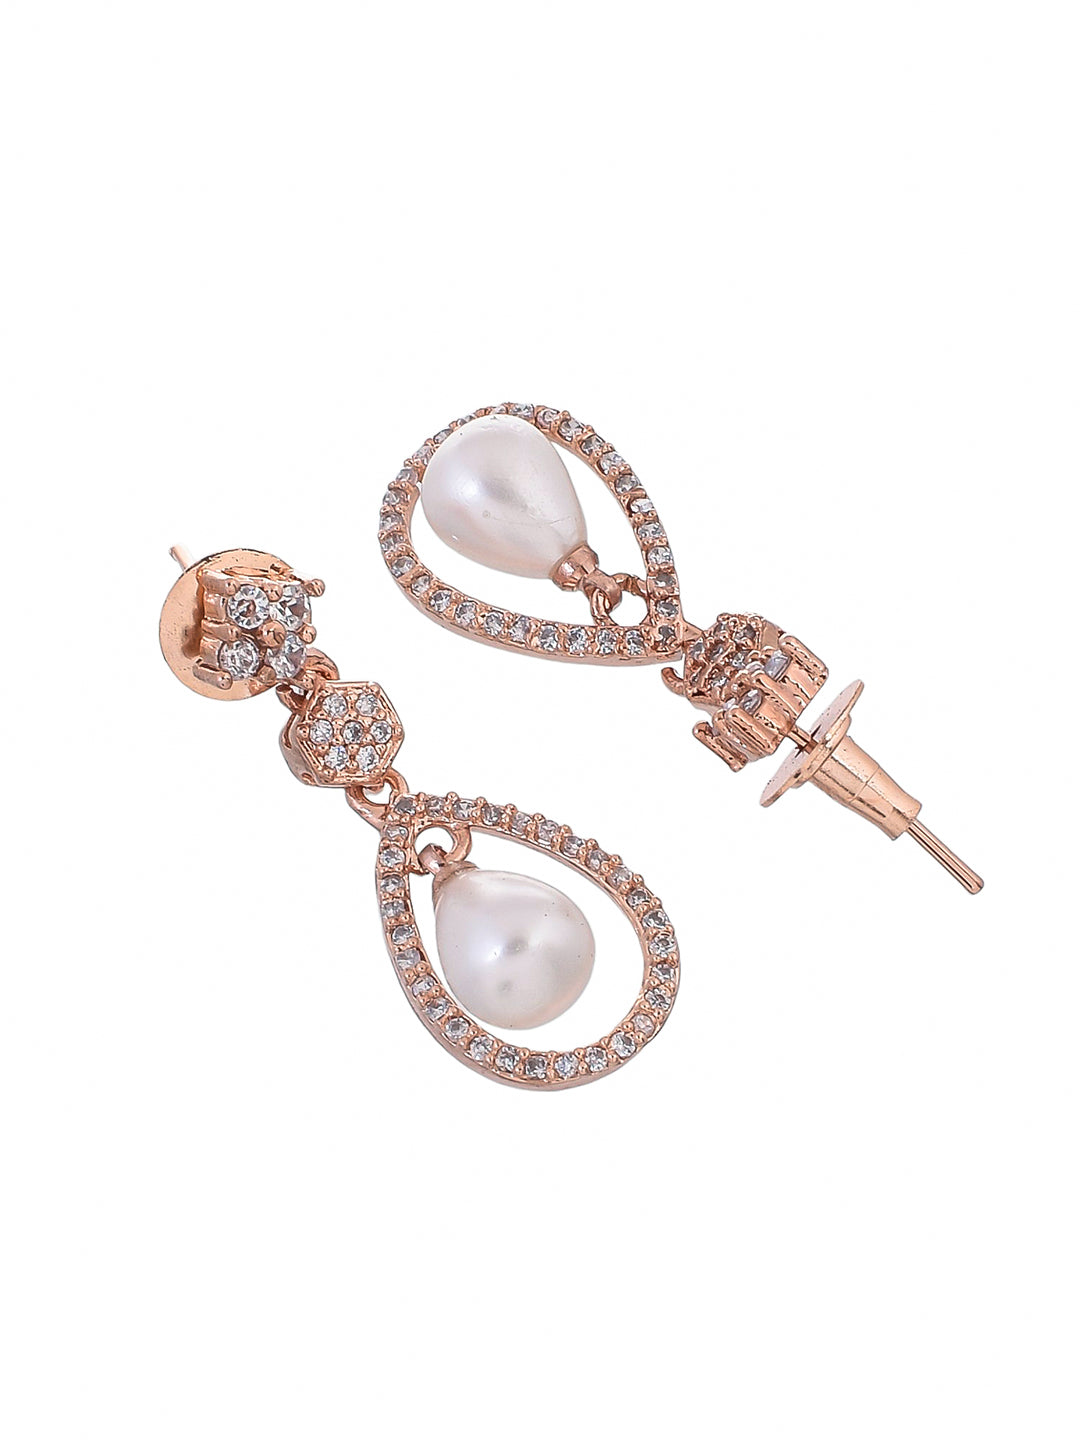 These beautiful White Rose Gold-Plated Cubic Zirconia Drop Earrings are the perfect addition to any outfit. Made with high-quality materials, they feature a stunning rose gold-plated design and sparkling cubic zirconia stones.